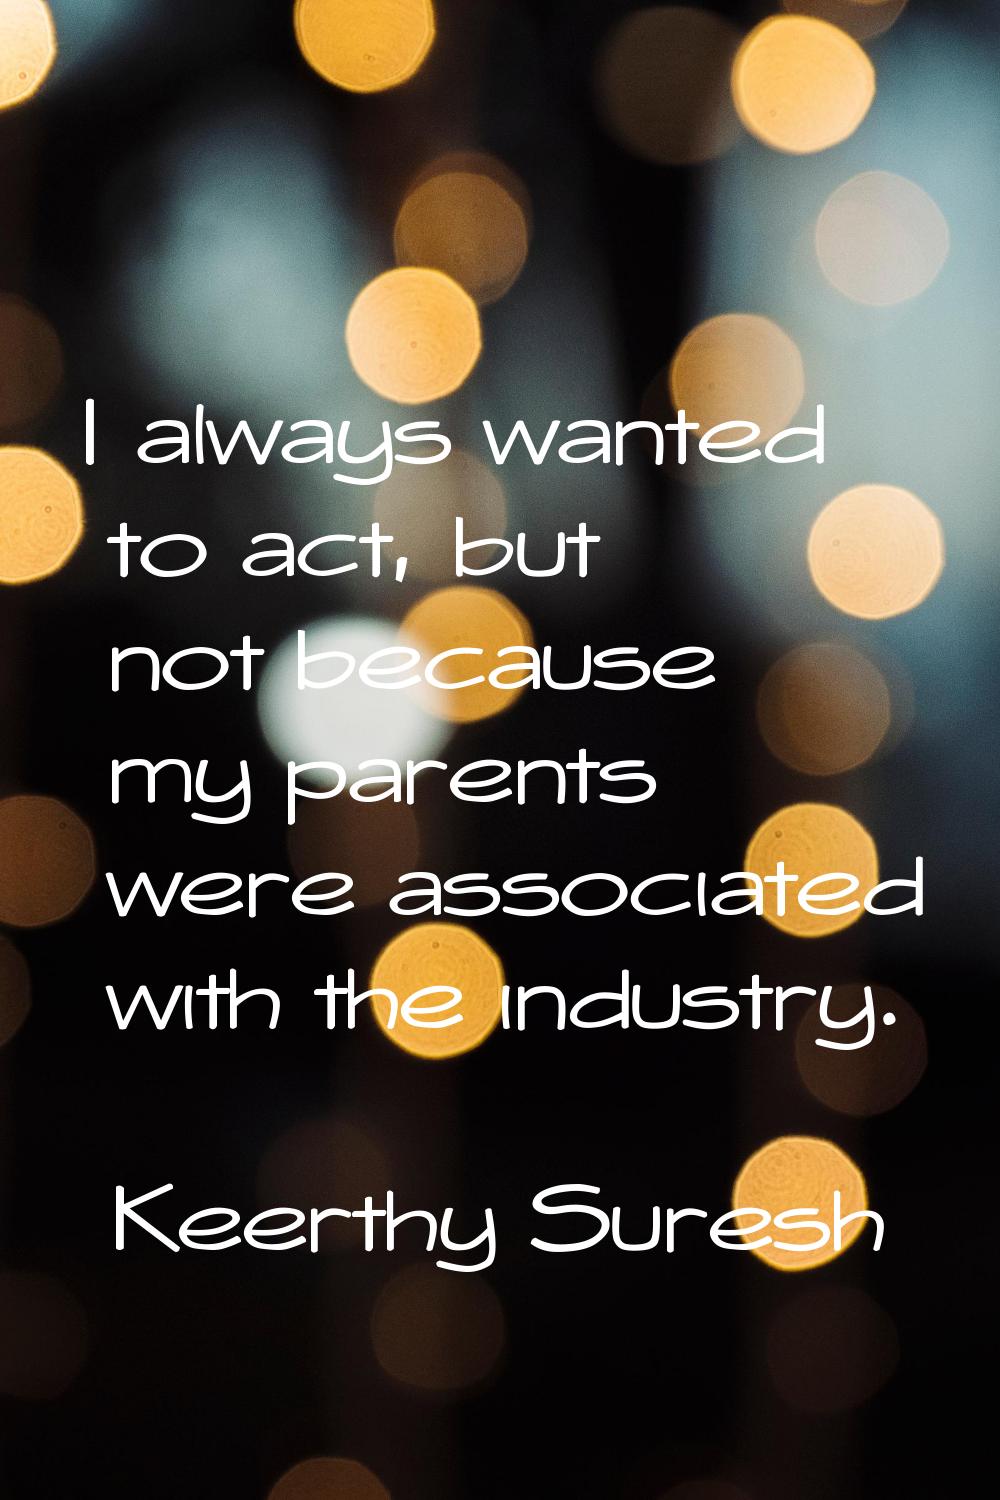 I always wanted to act, but not because my parents were associated with the industry.